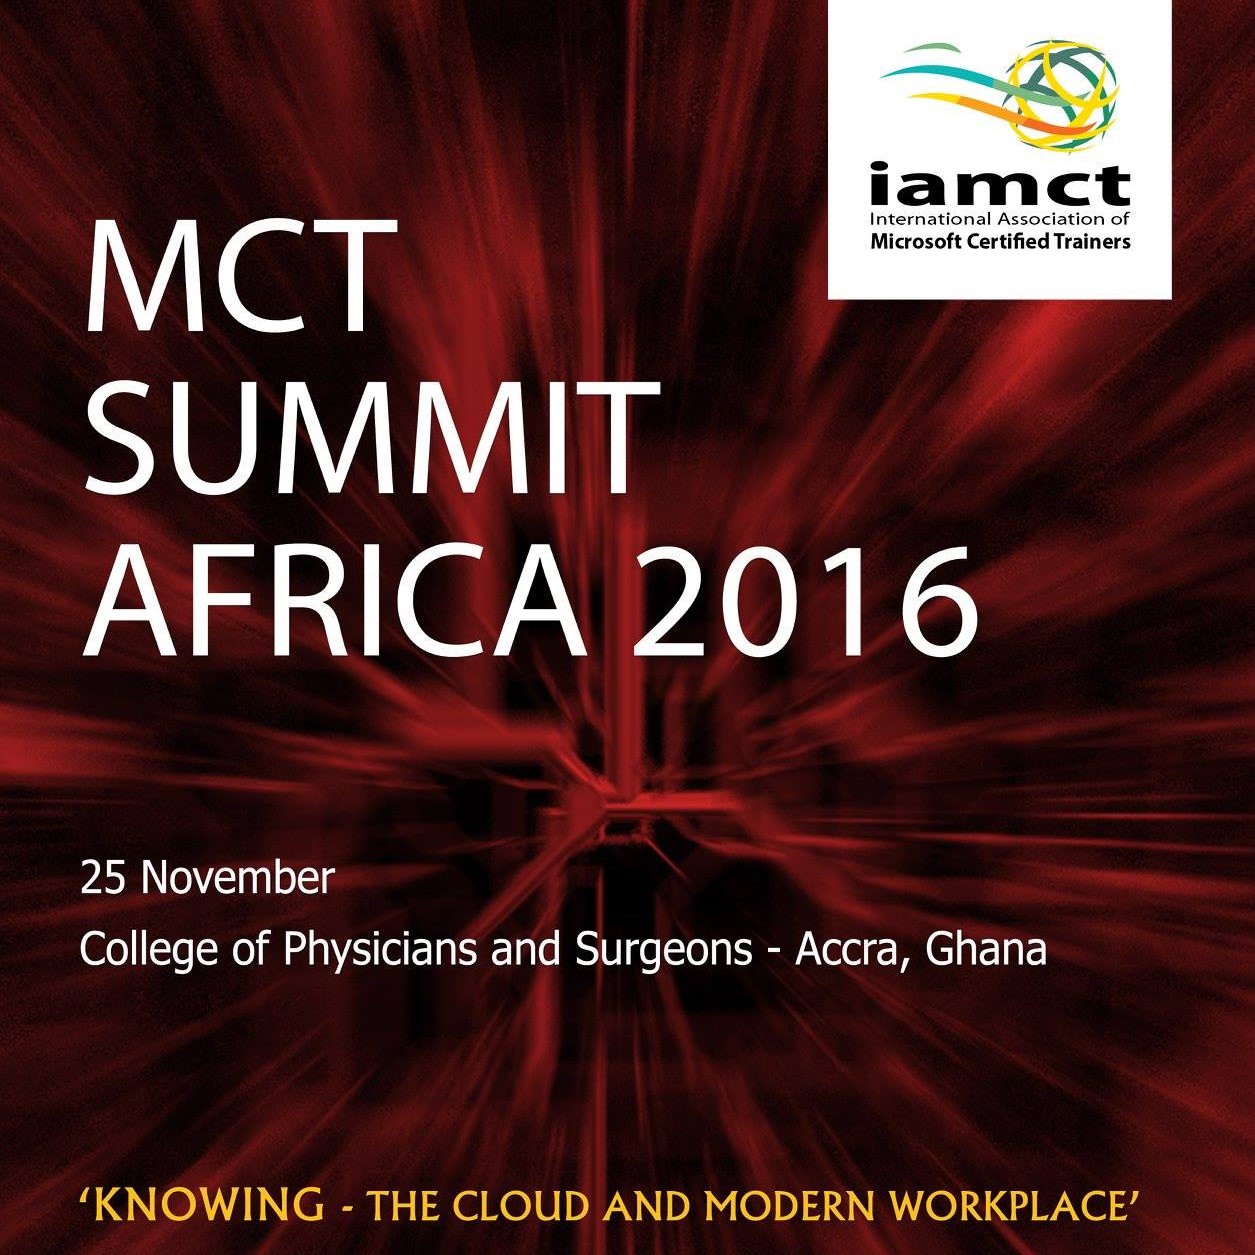 Microsoft Certified Trainers Summit Africa 2016